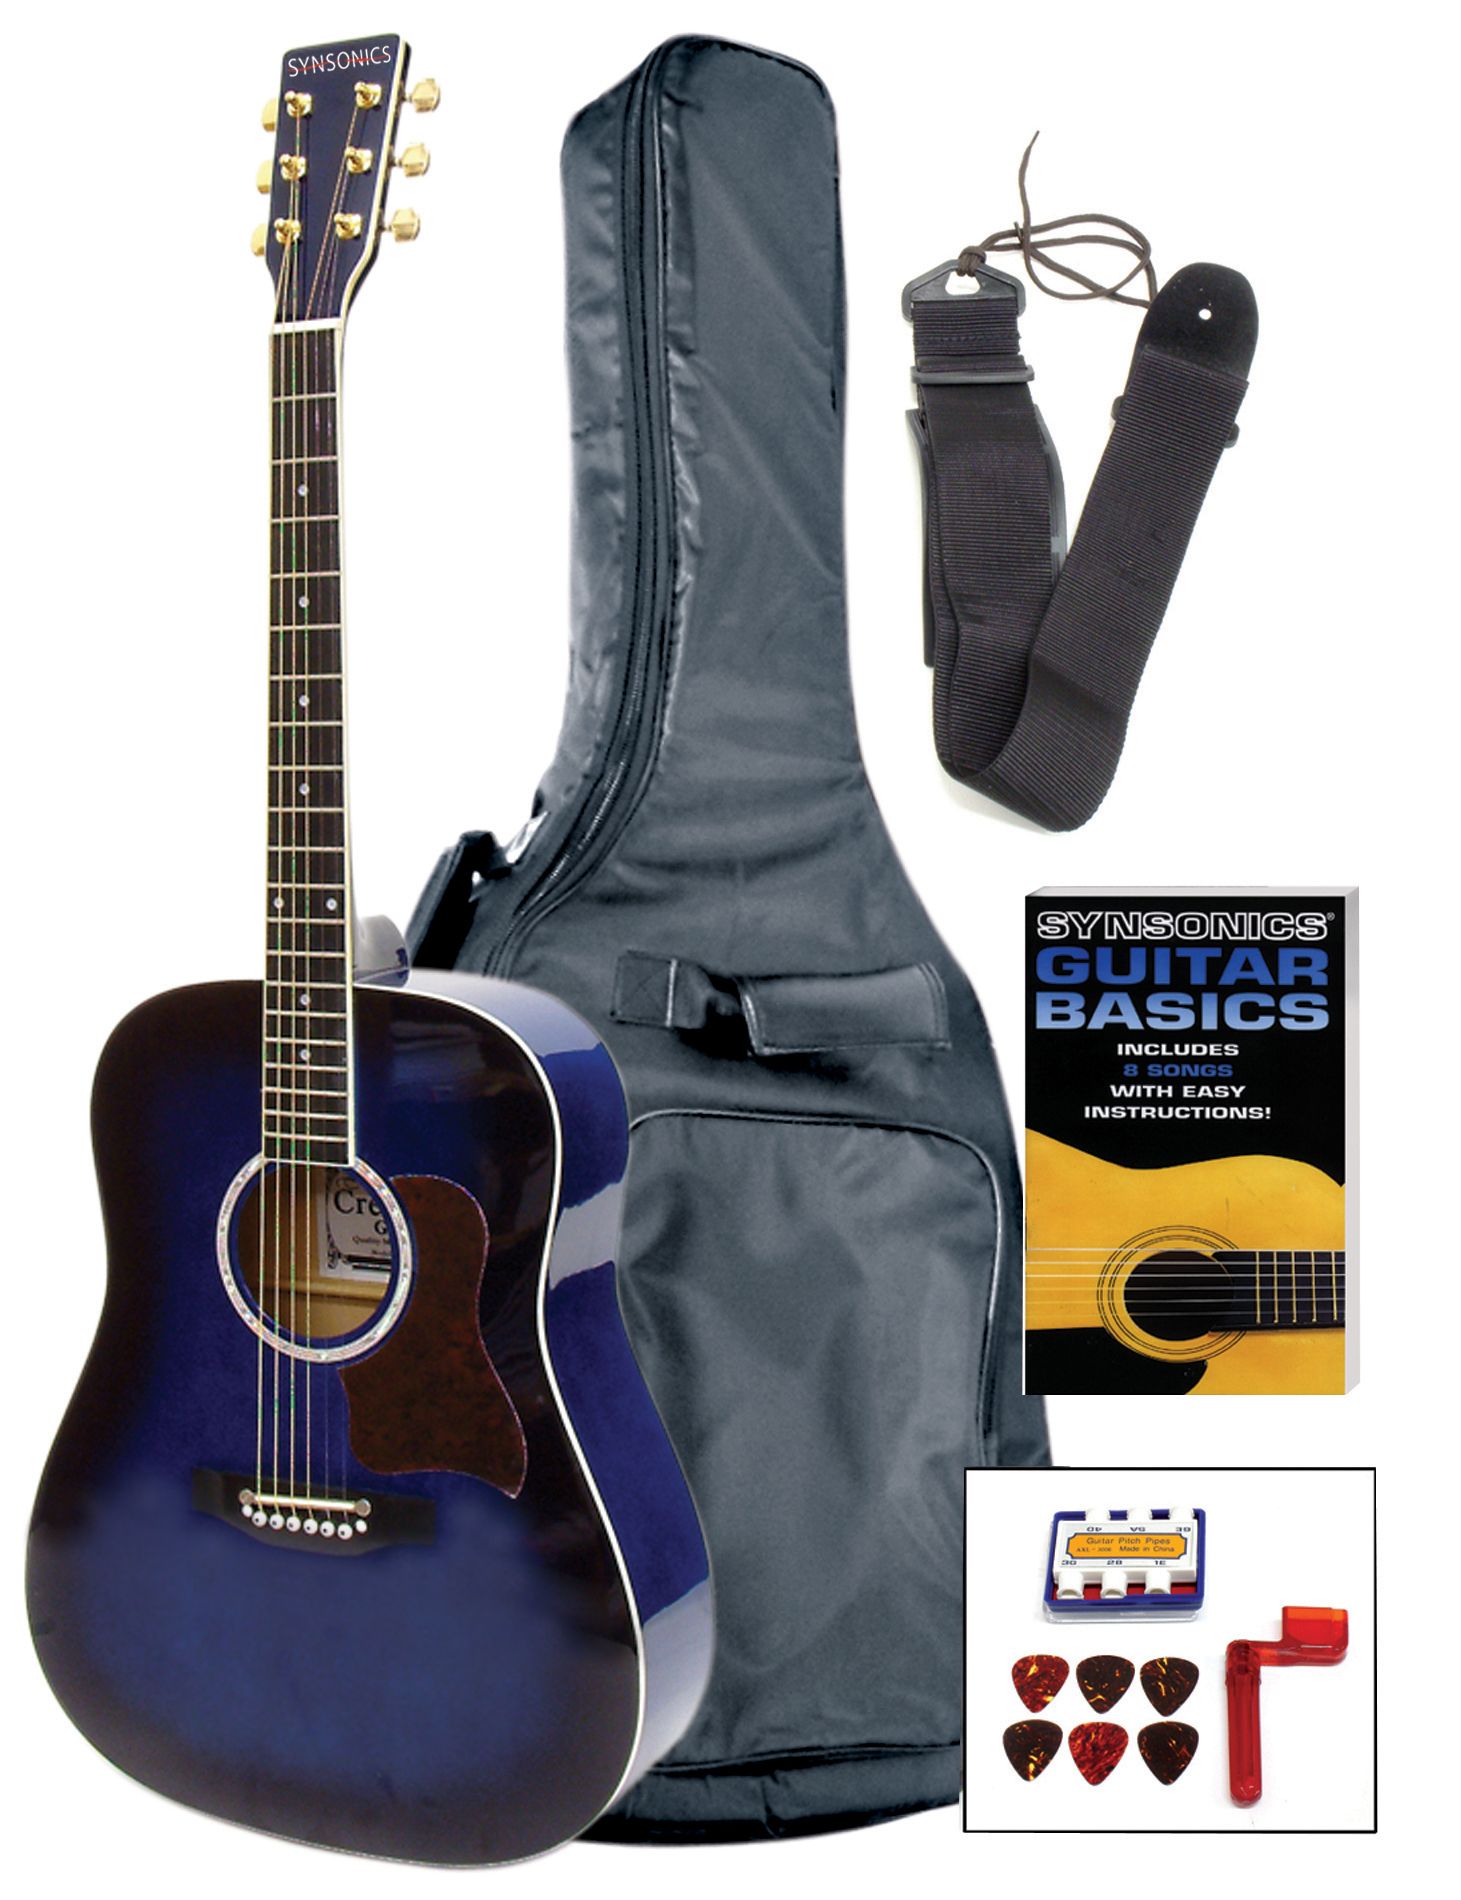 Synsonics 60201BL dreadnought guitar outfit - blueburst